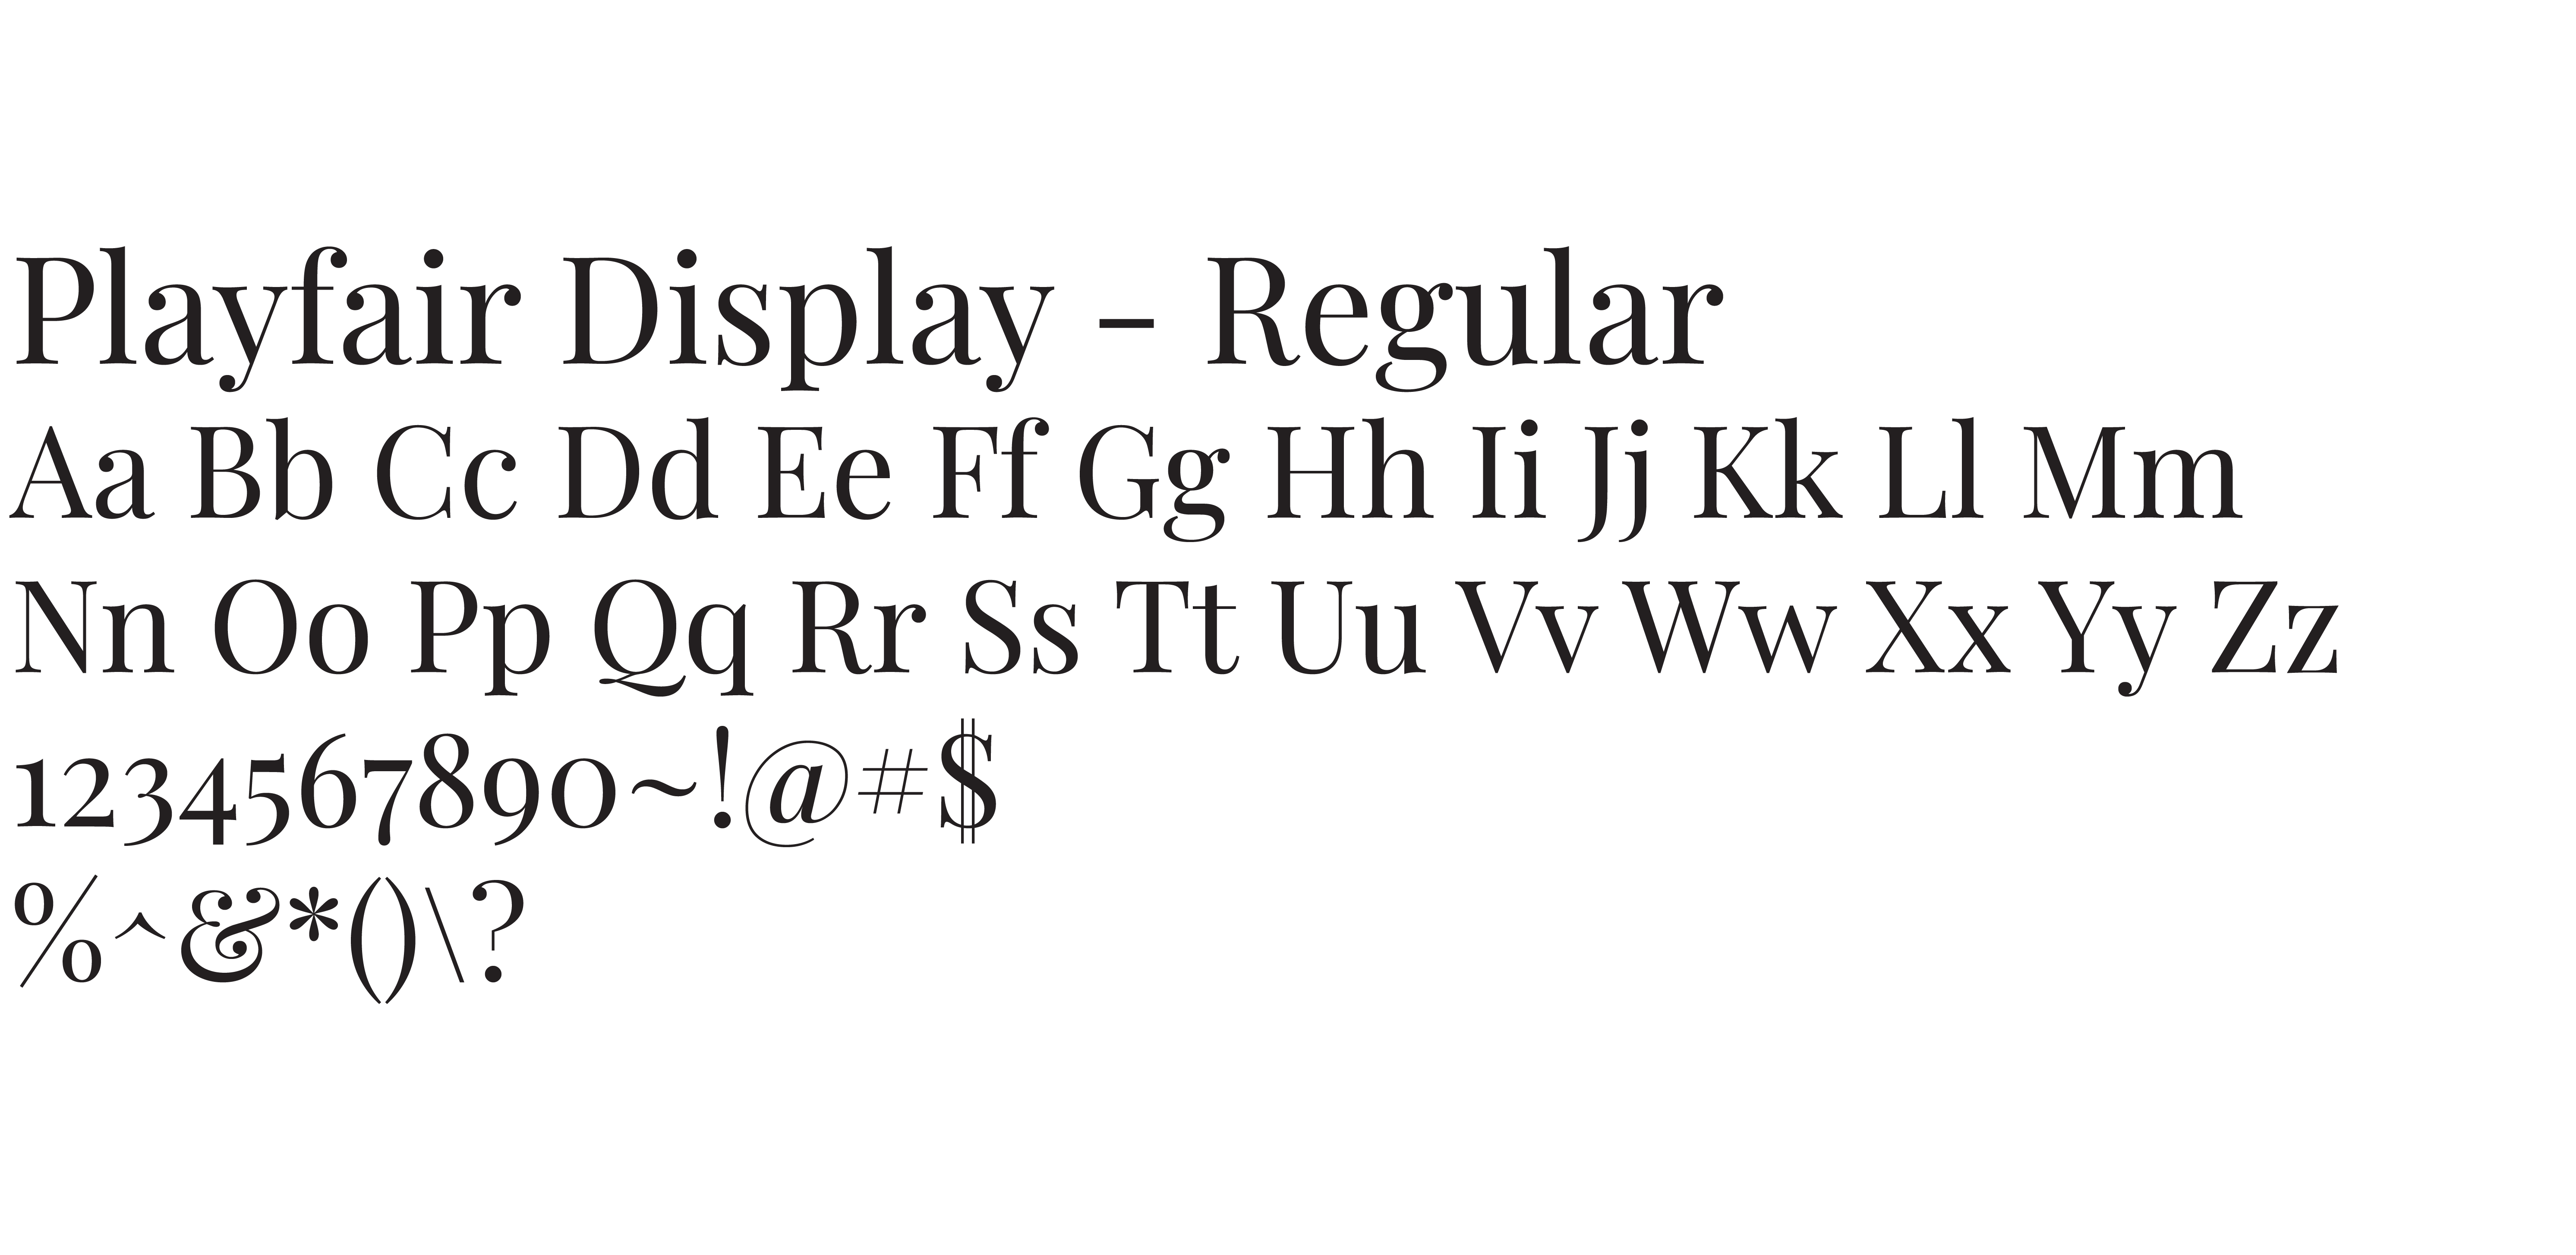 Type Study of the Little O project: Playfair Display Regular